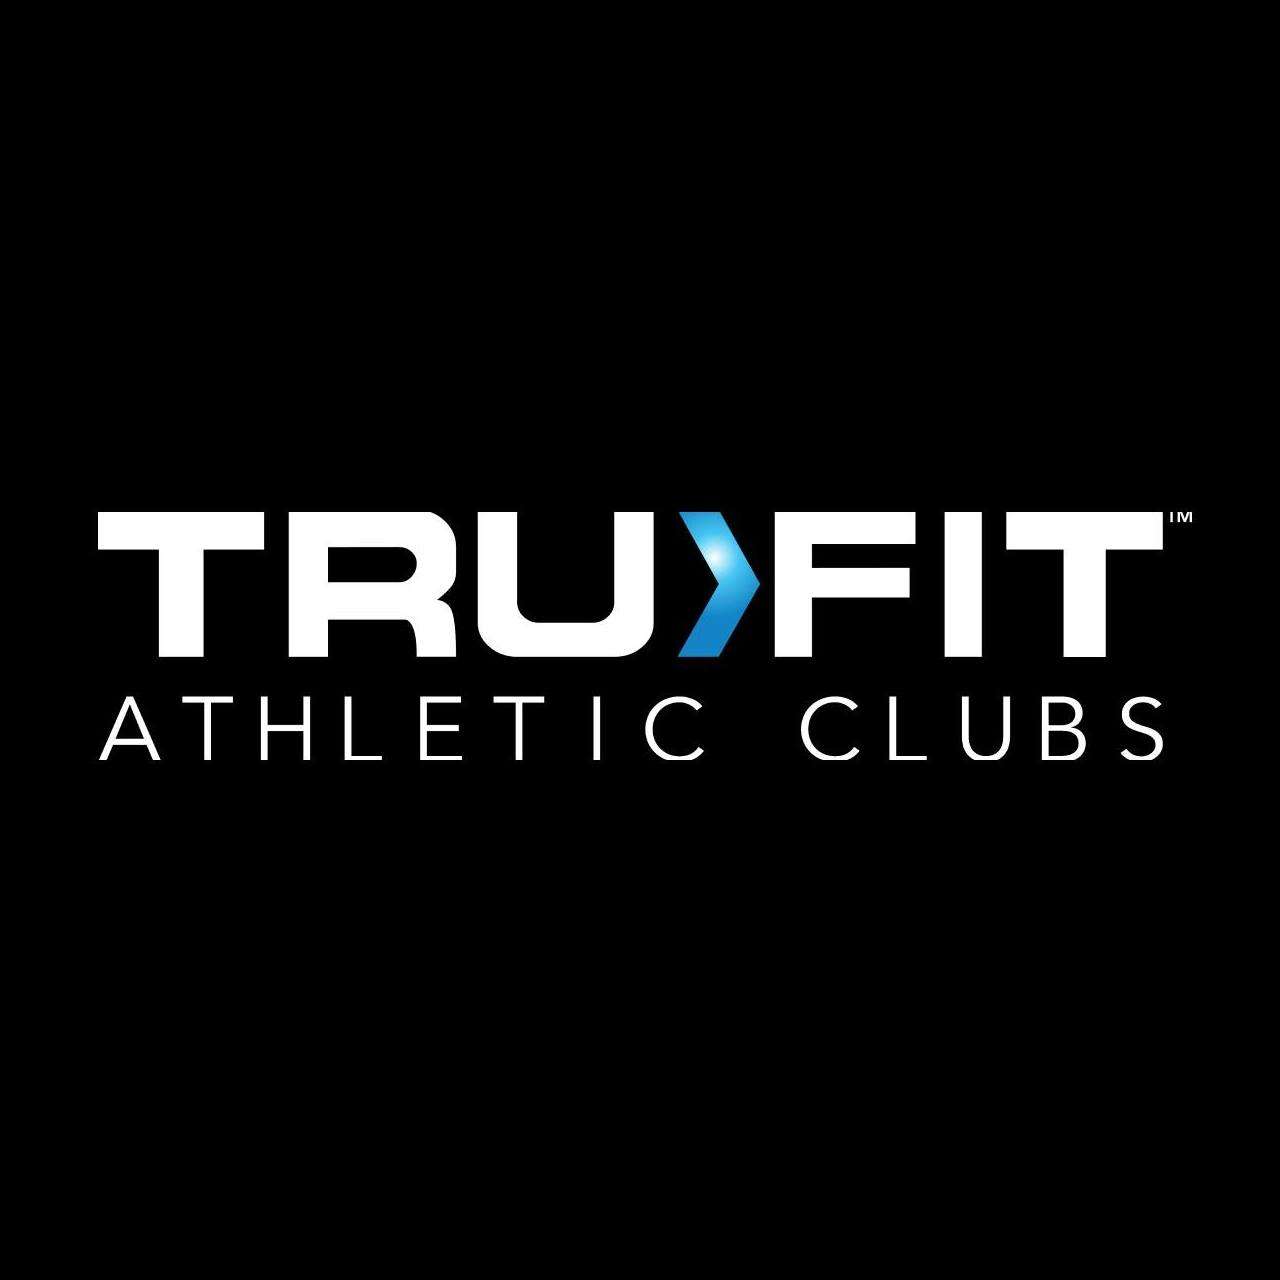 Tru Fit Athletic Clubs - Crunchbase Company Profile & Funding